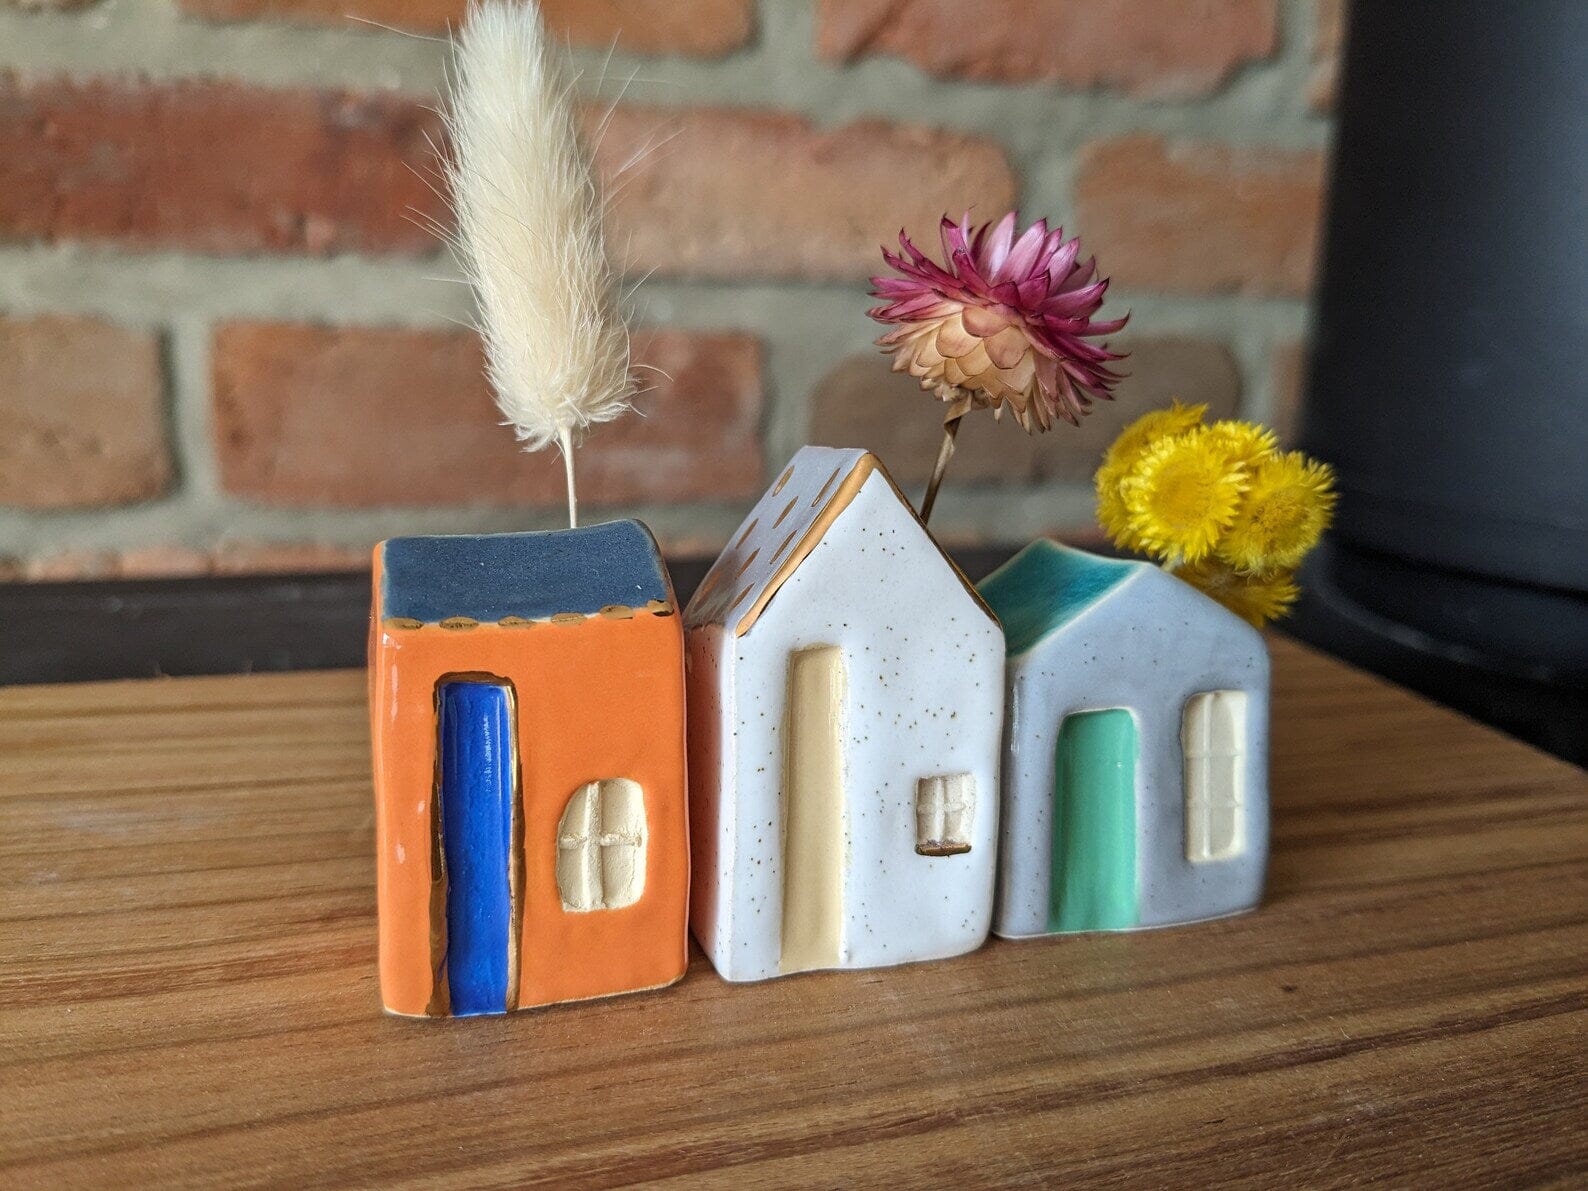 Tiny Houses - Funky Pickle Ceramics funky pickle 